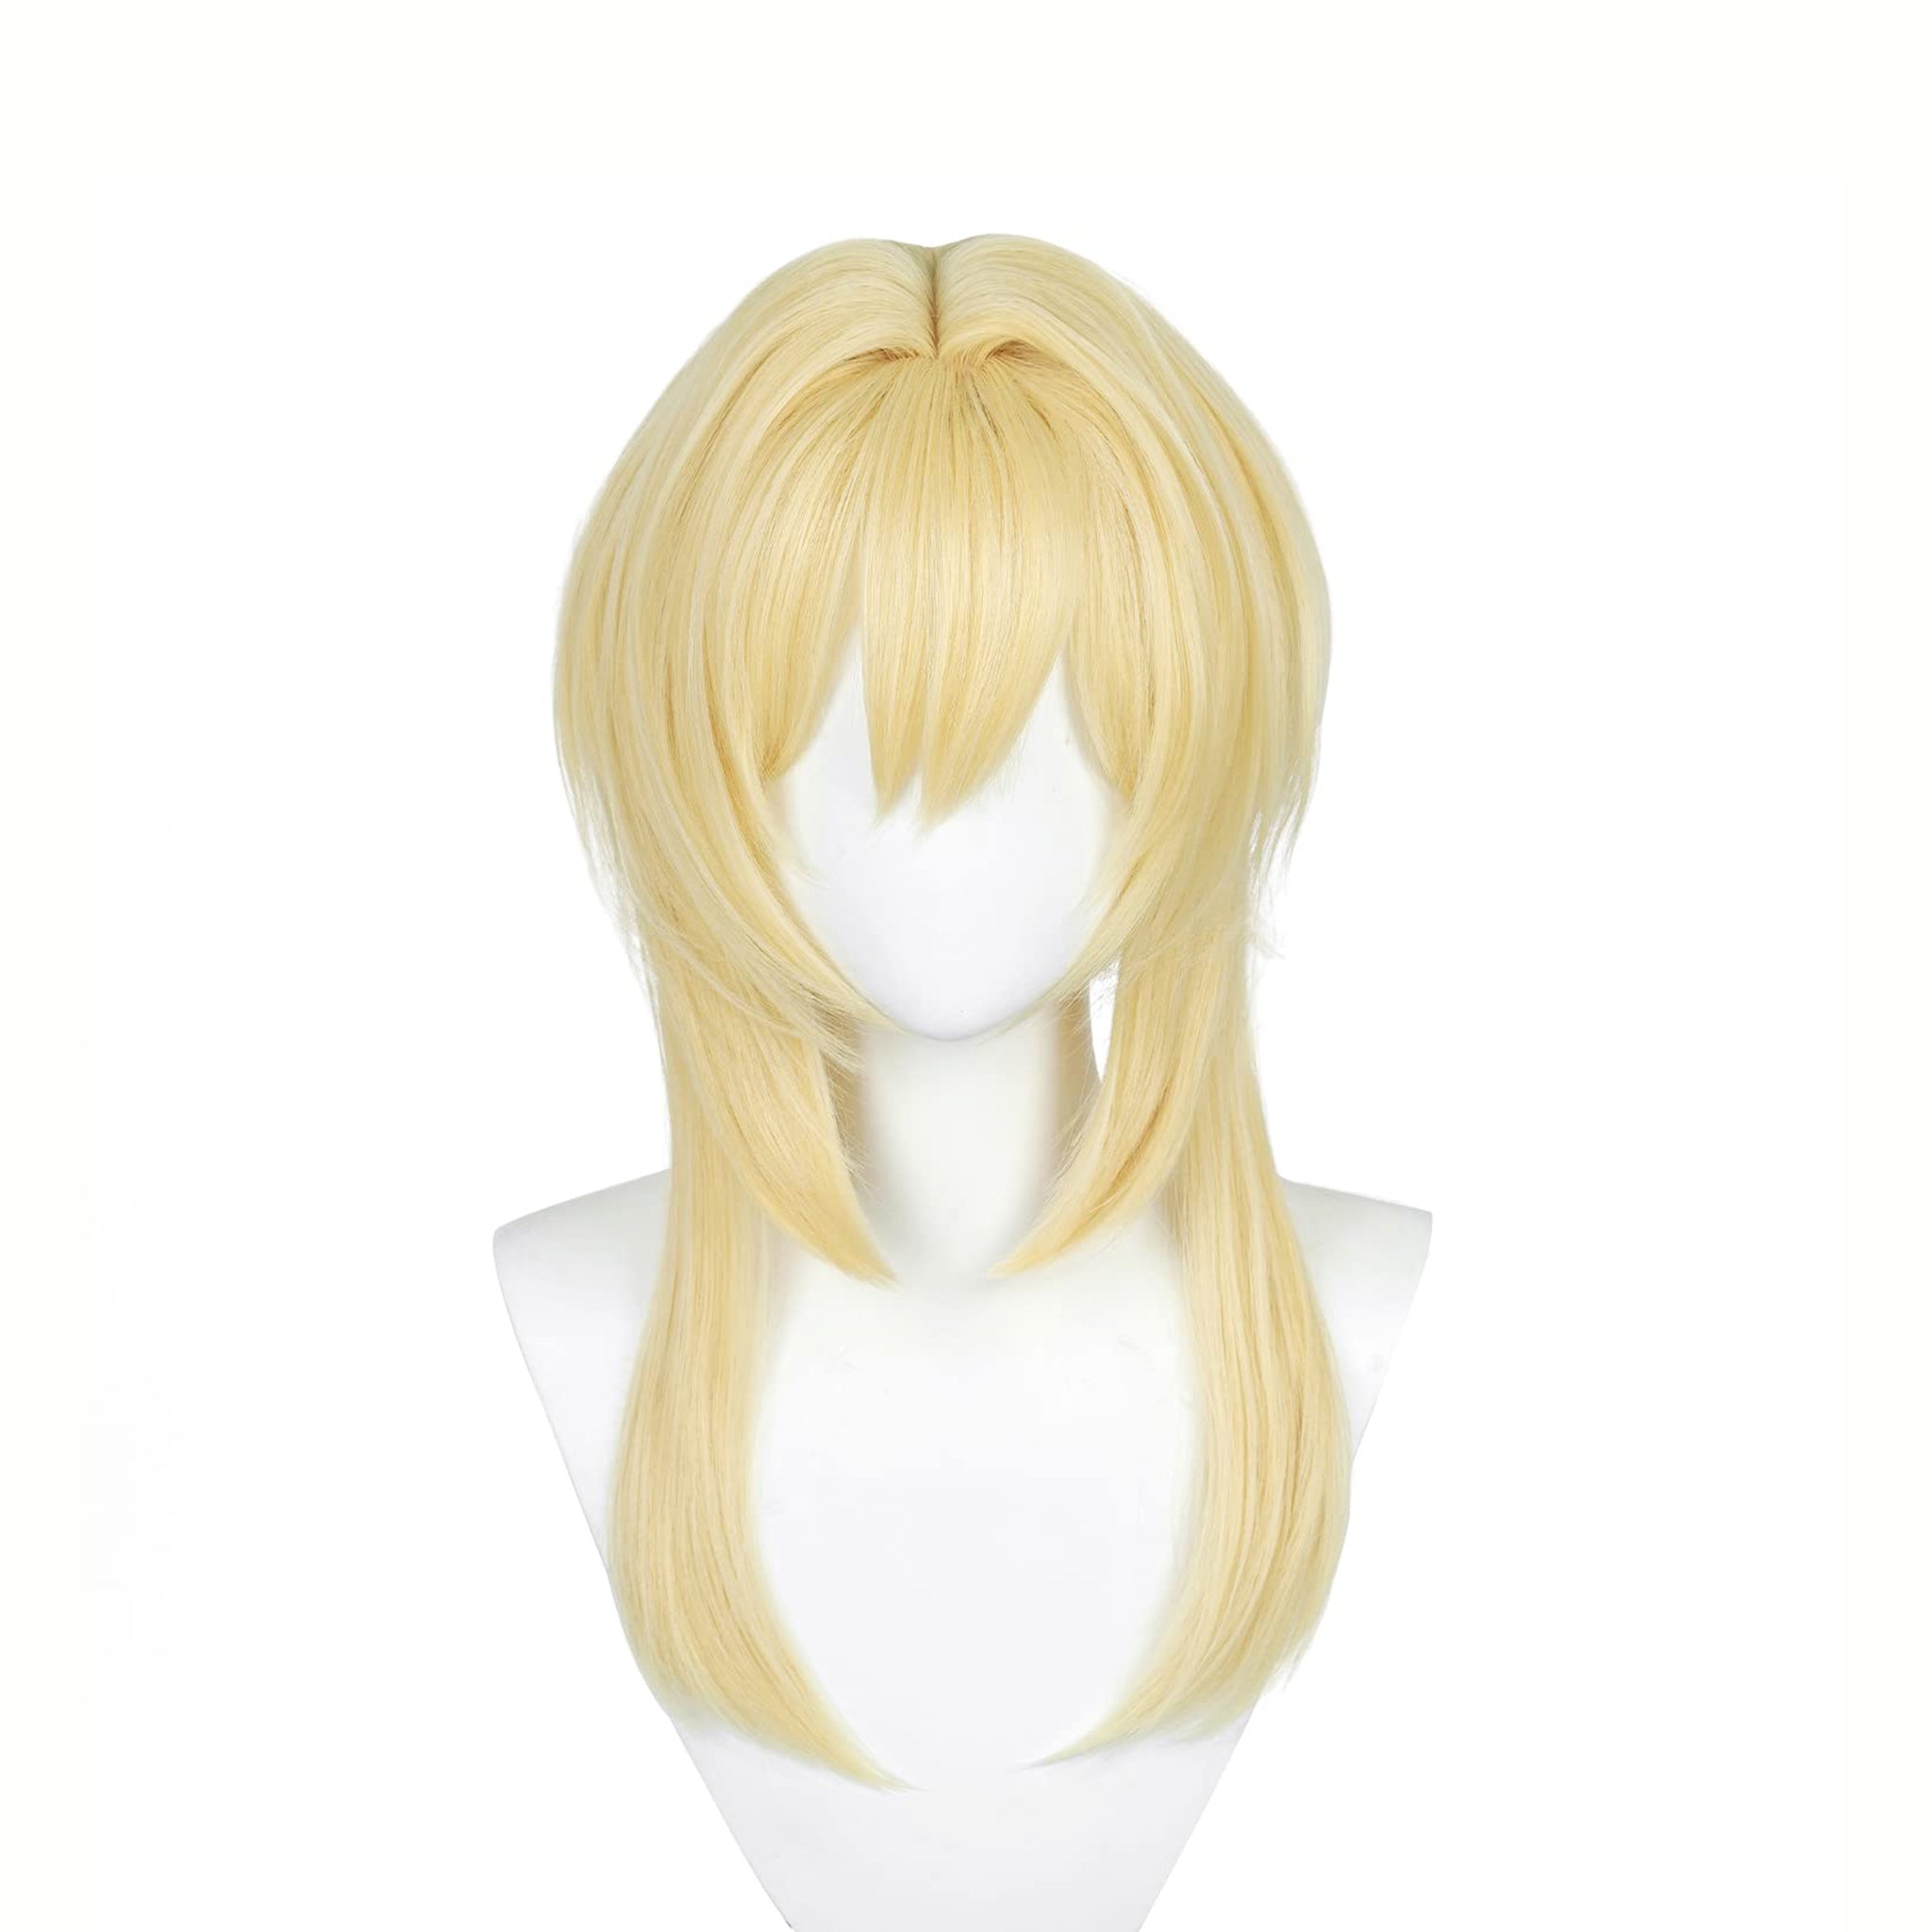 Epic Cosplay Wigs - Securing Wigs with Toupee Clips